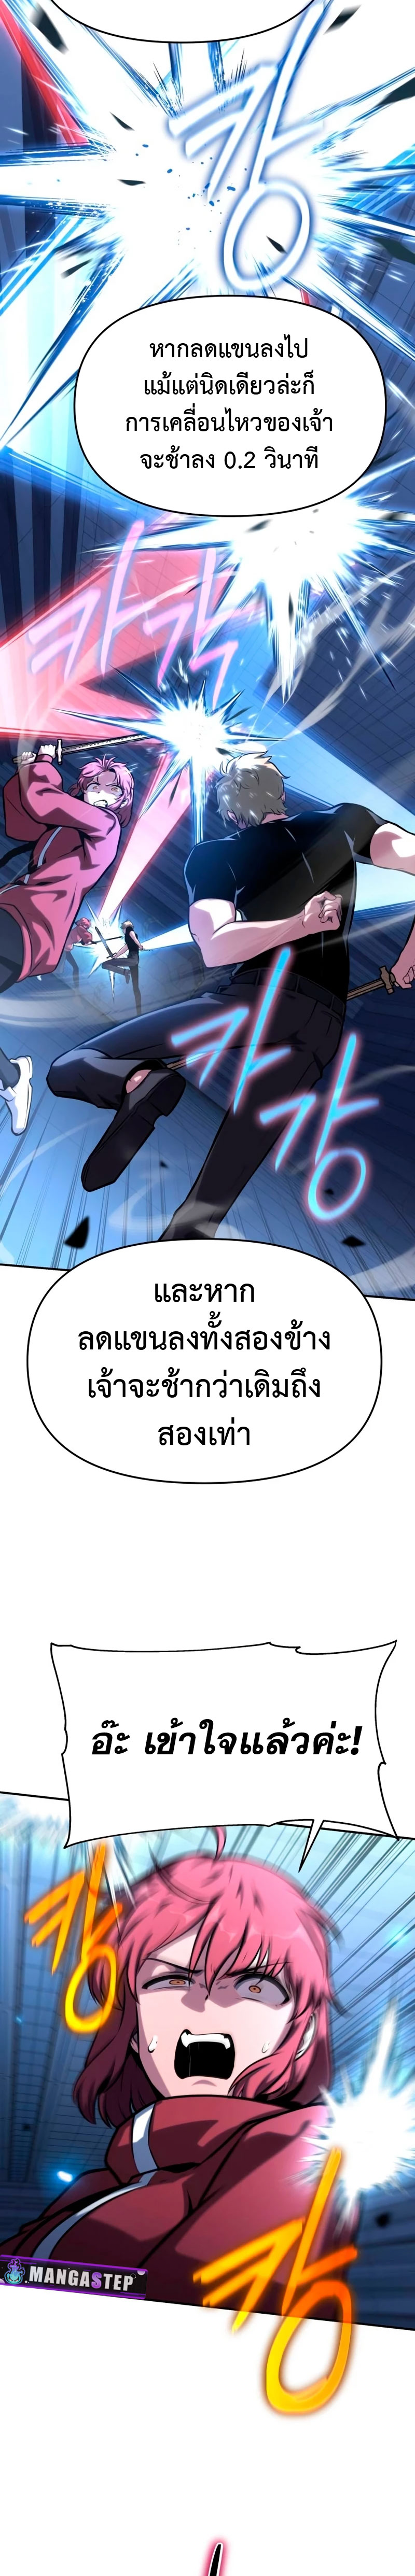 The Knight King 46 (17)